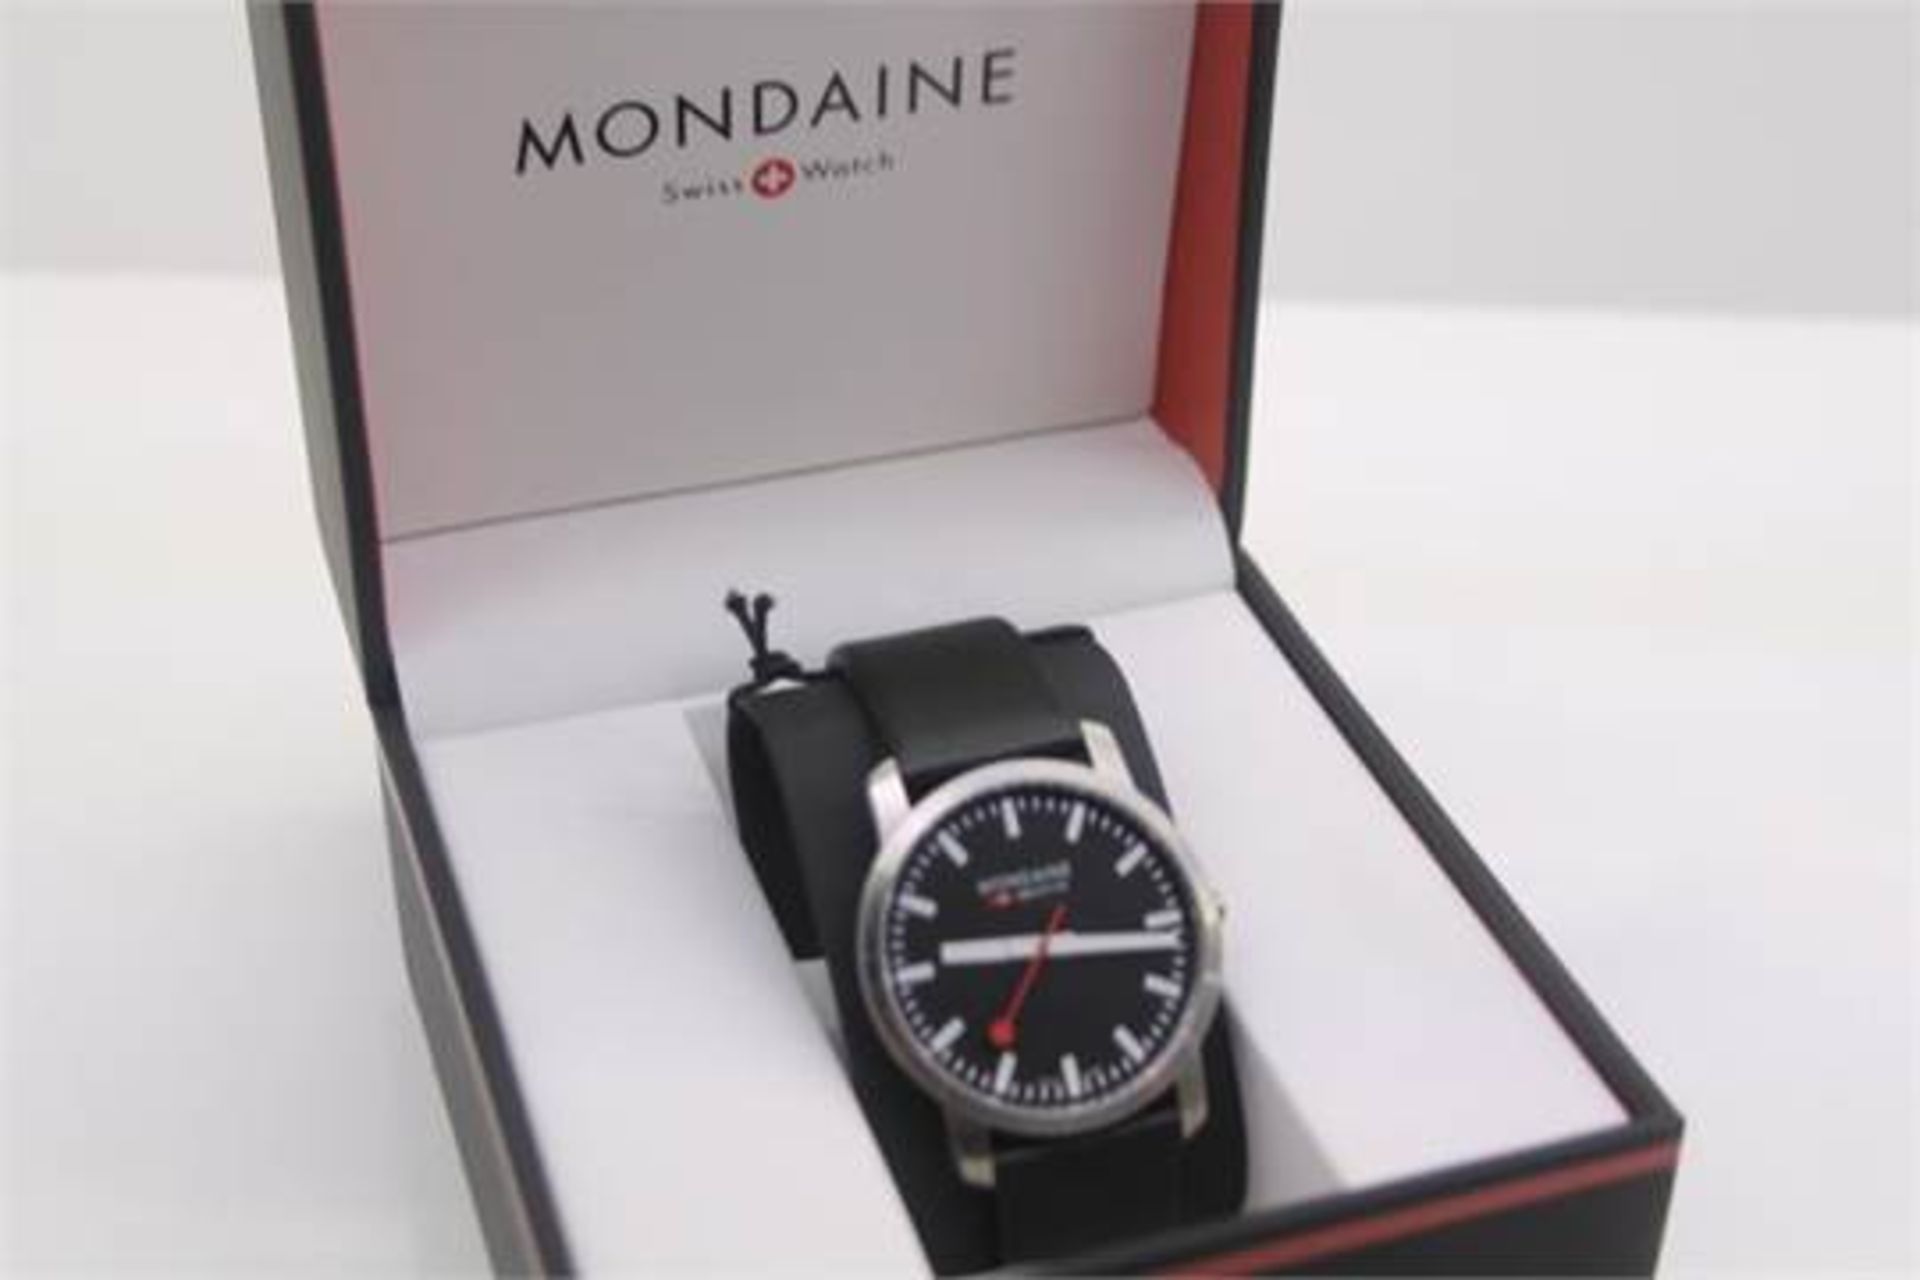 BOXED MONDAINE SWISS MADE LUXURY WRIST WATCH, GENUINE LEATHER STRAP RRP £175 (ADC-9100426)(10.04.